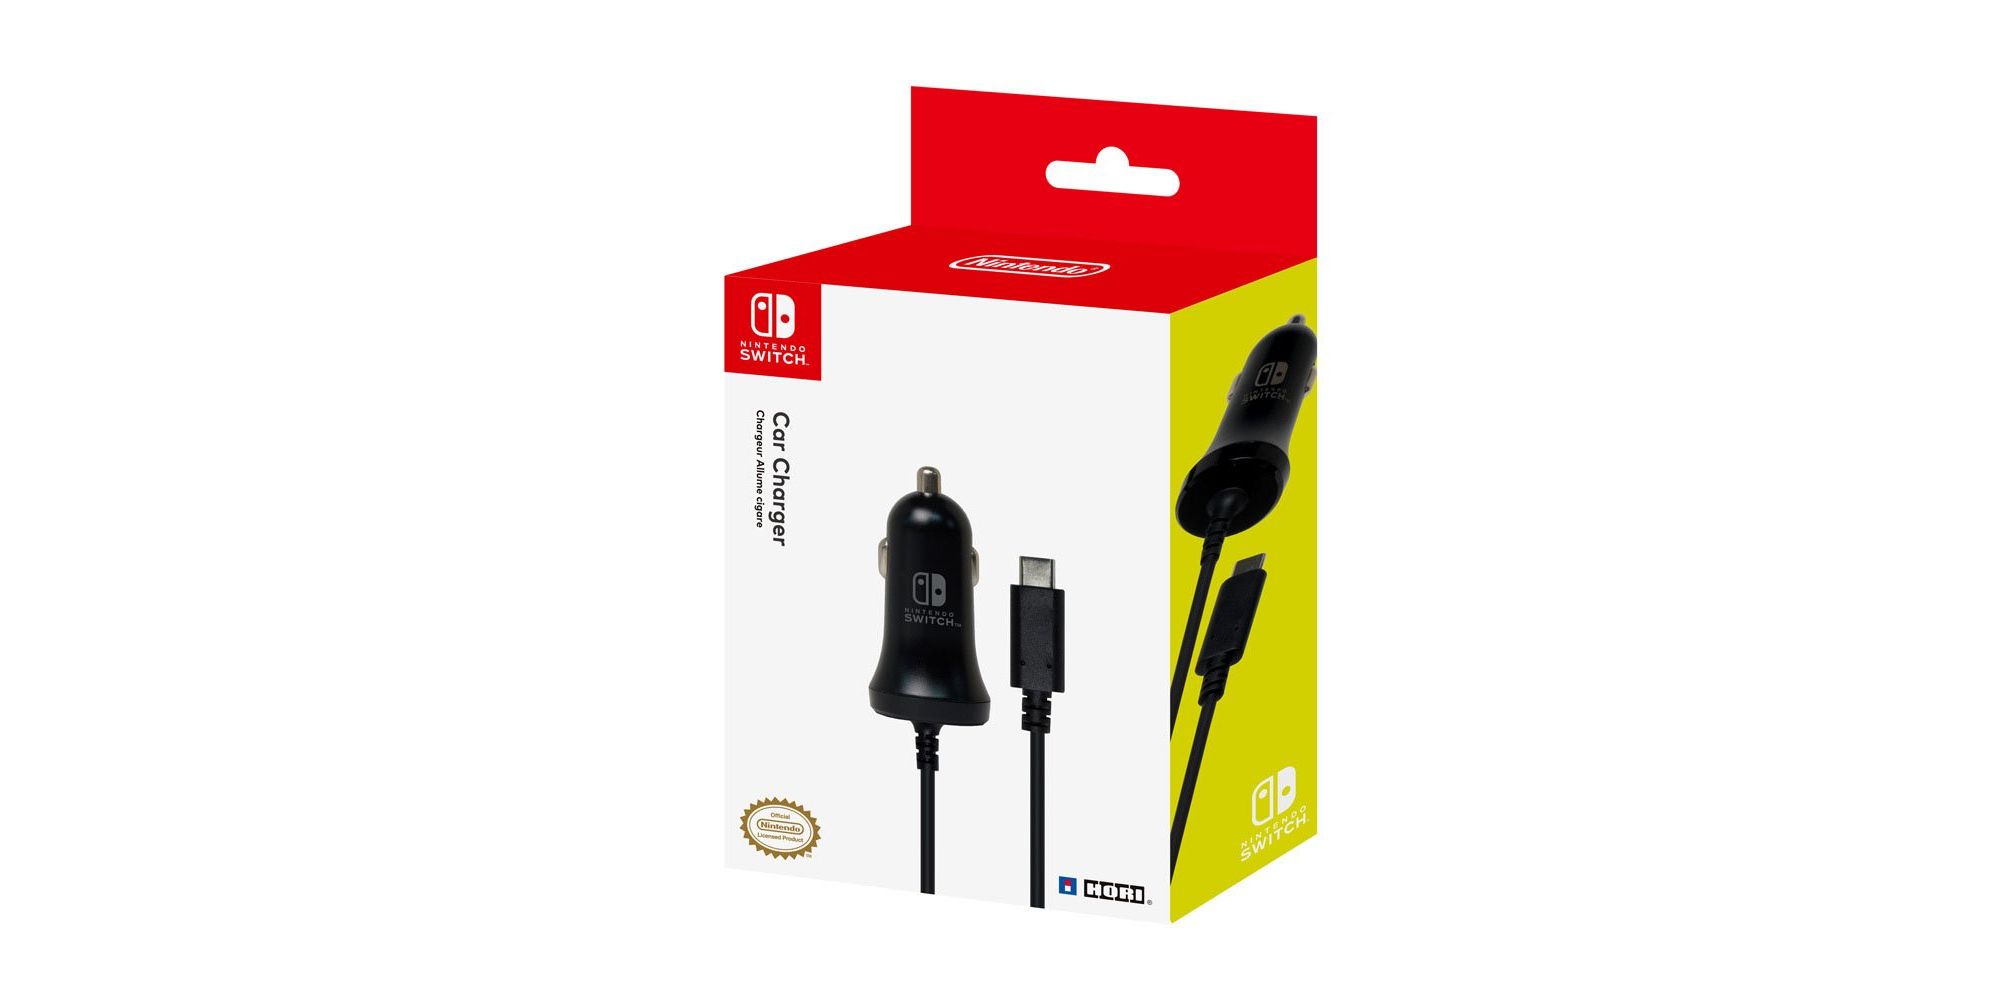 The box for the Hori Switch Car Charger featuring an image of the car charger itself